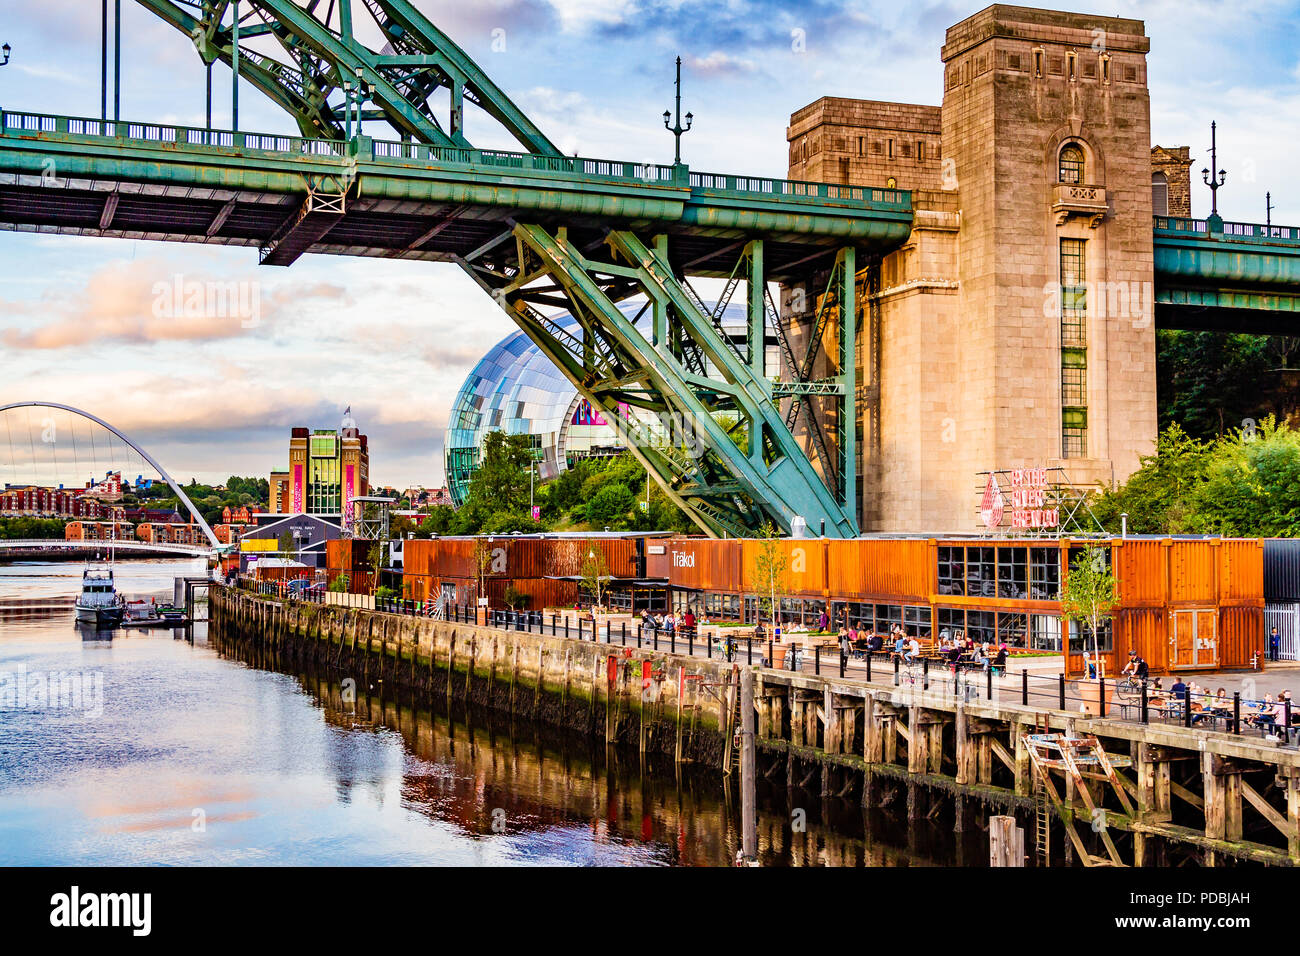 Riverside Brew Co bar and restaurant in reused shipping containers on the Tyne riverside under the Tyne Bridge, helping to regenerate Gateshead. 2018. Stock Photo